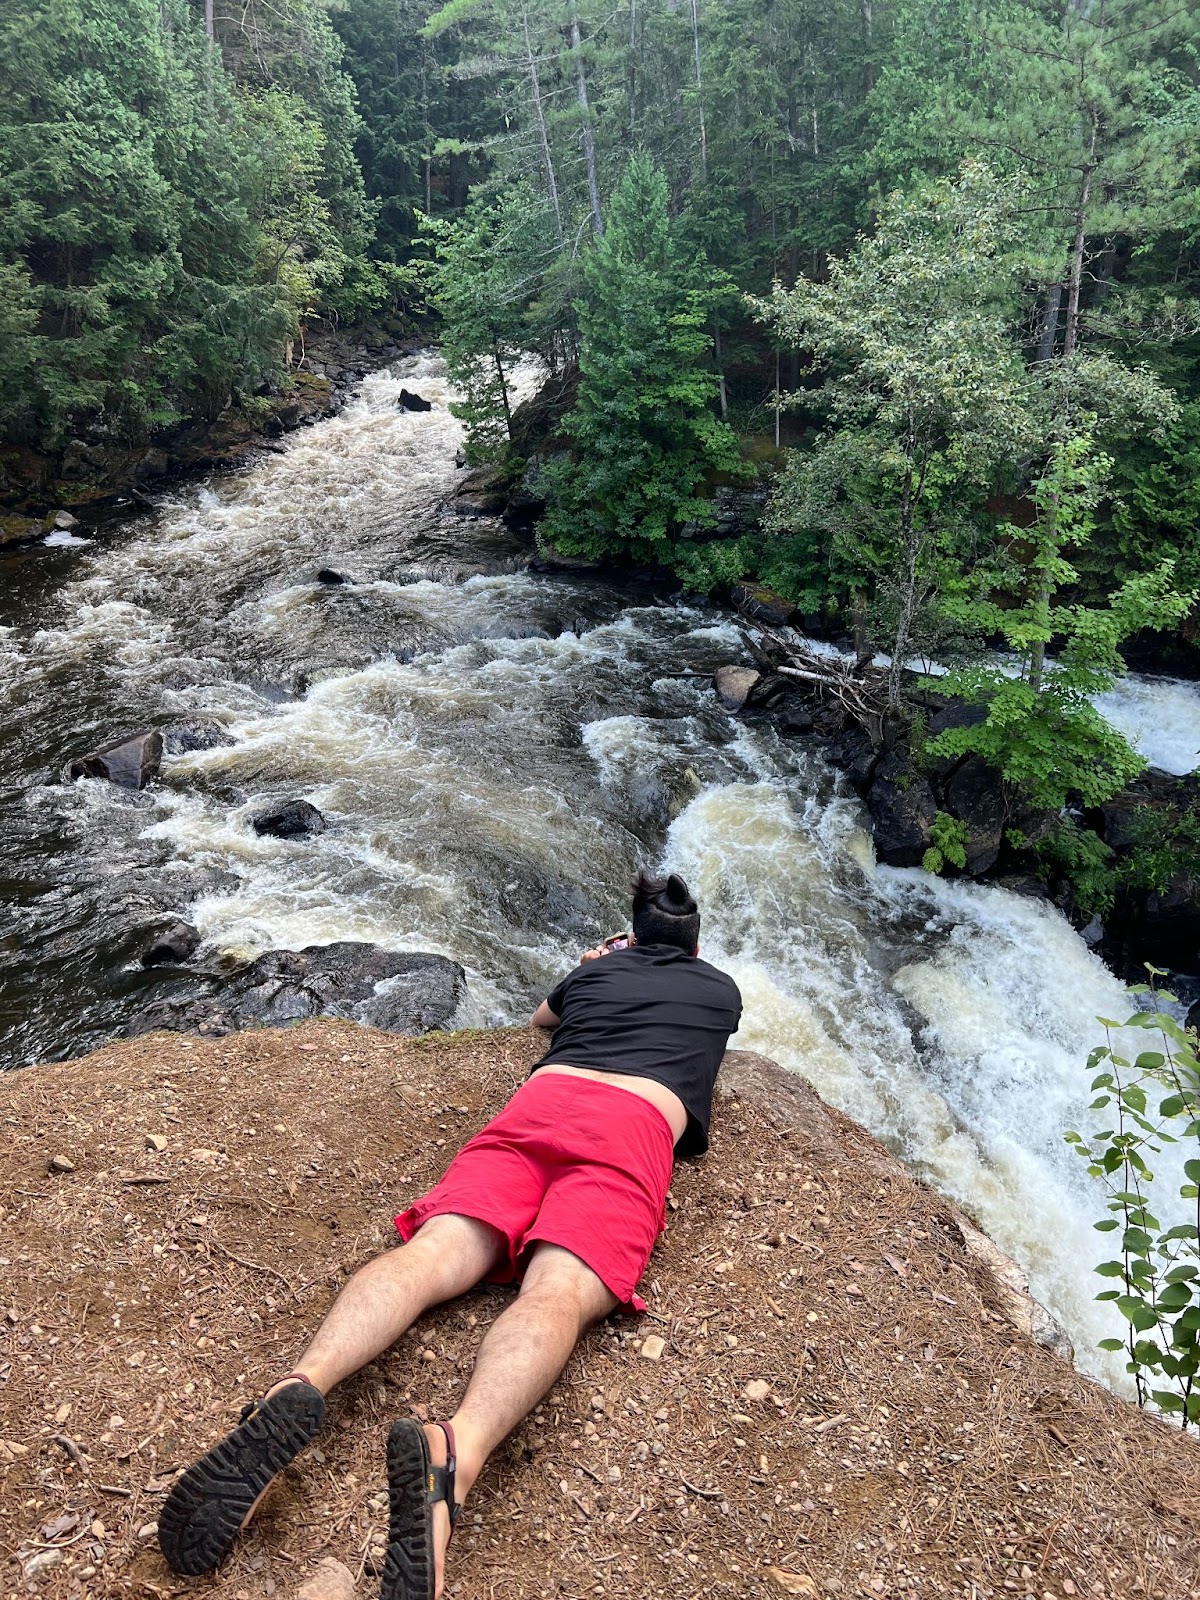 Eau Claire Gorge; a man lays on his belly looking down into a high, tree-filled gorge with a raging river and waterfall through it.